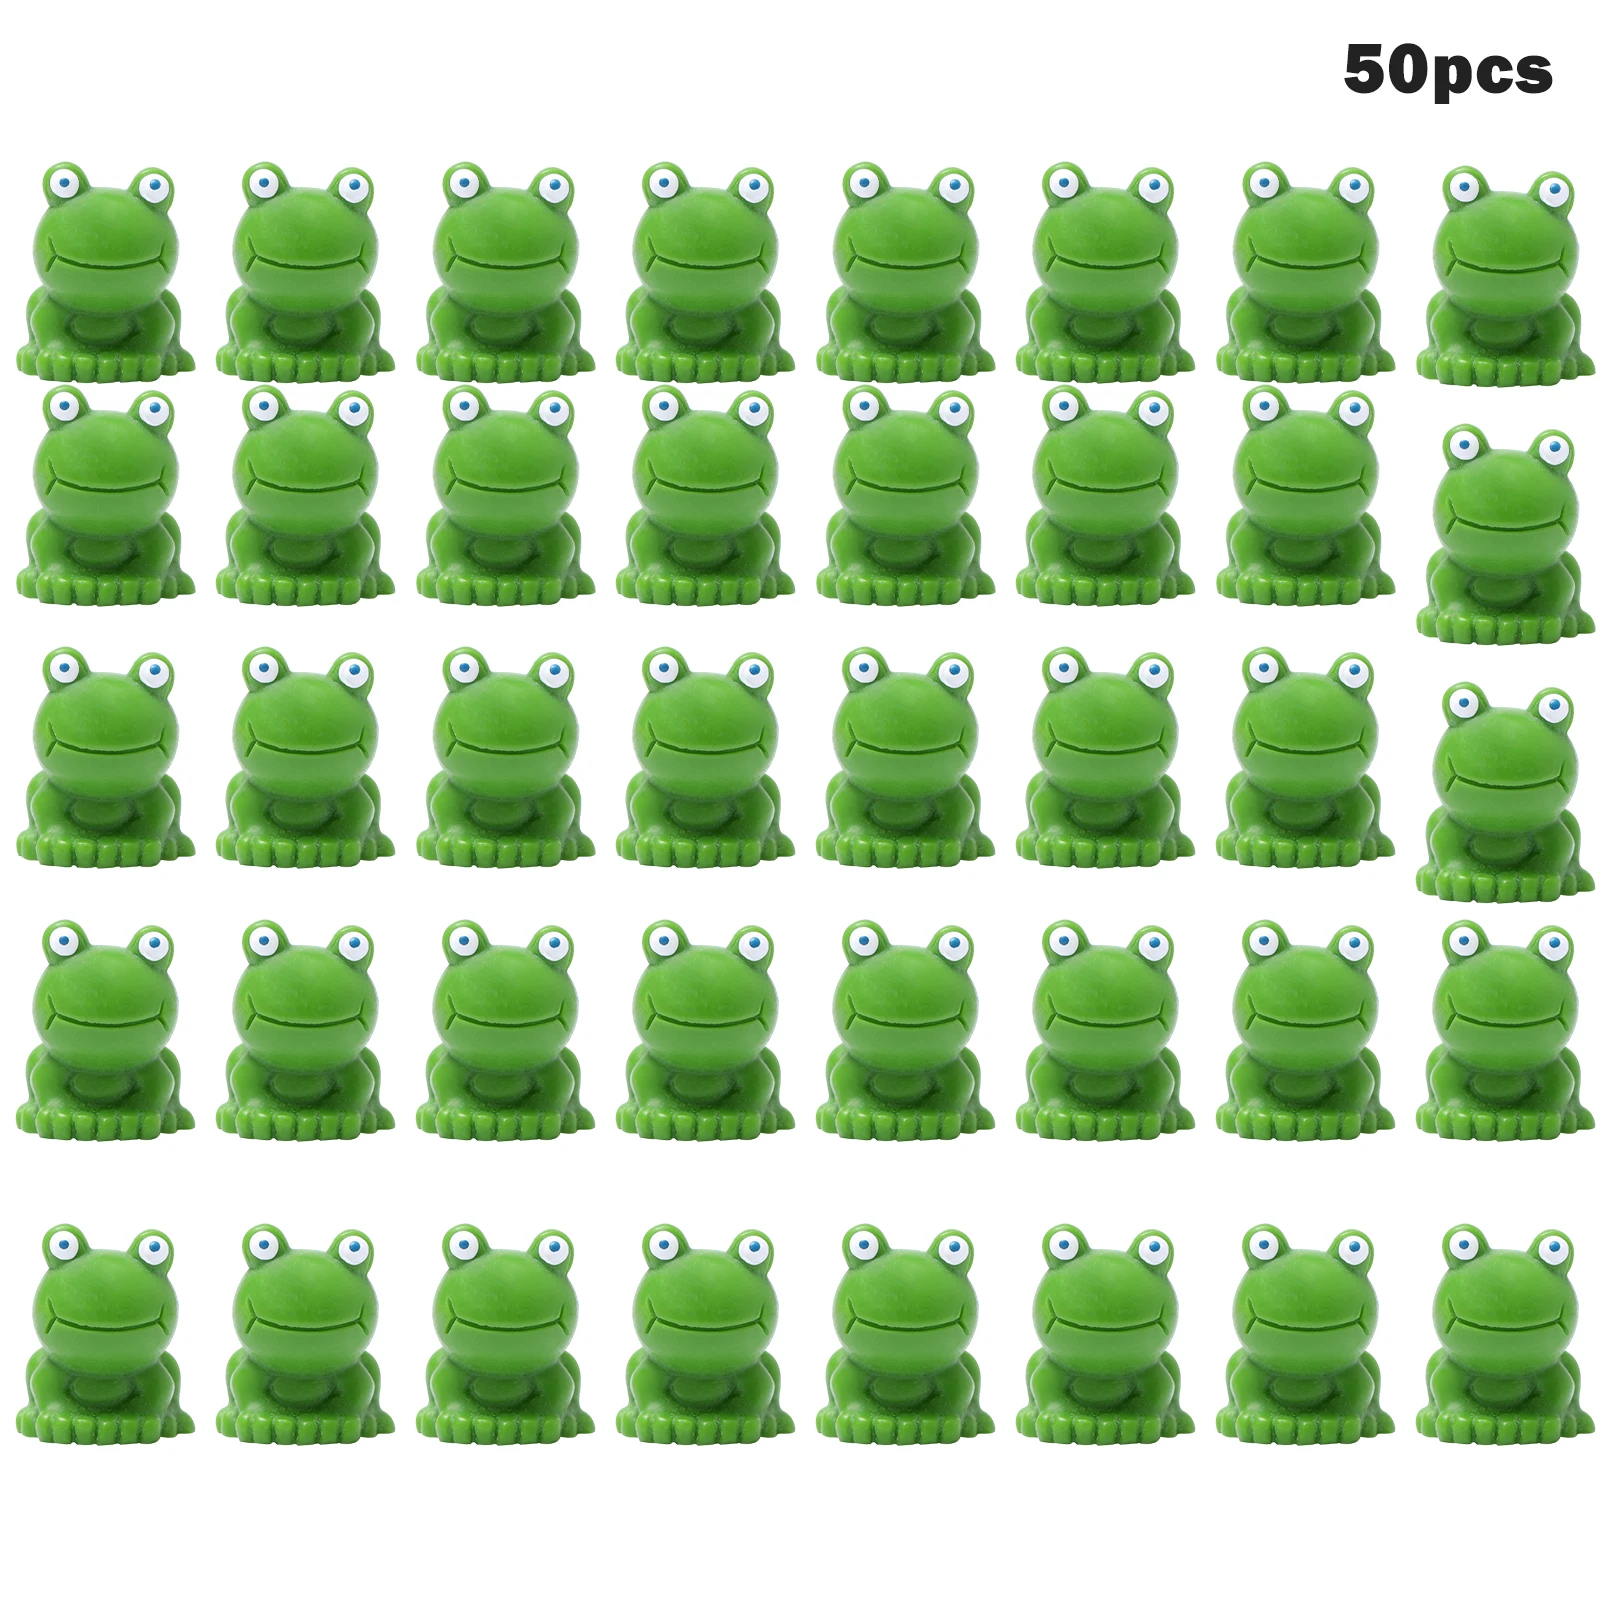 100pcs Tiny Frog Resin Mini Frogs Figurines,Garden Decor Green Frog  Figurines Miniature Home Décor Plastic Frogs Fairy DIY Craft - AliExpress